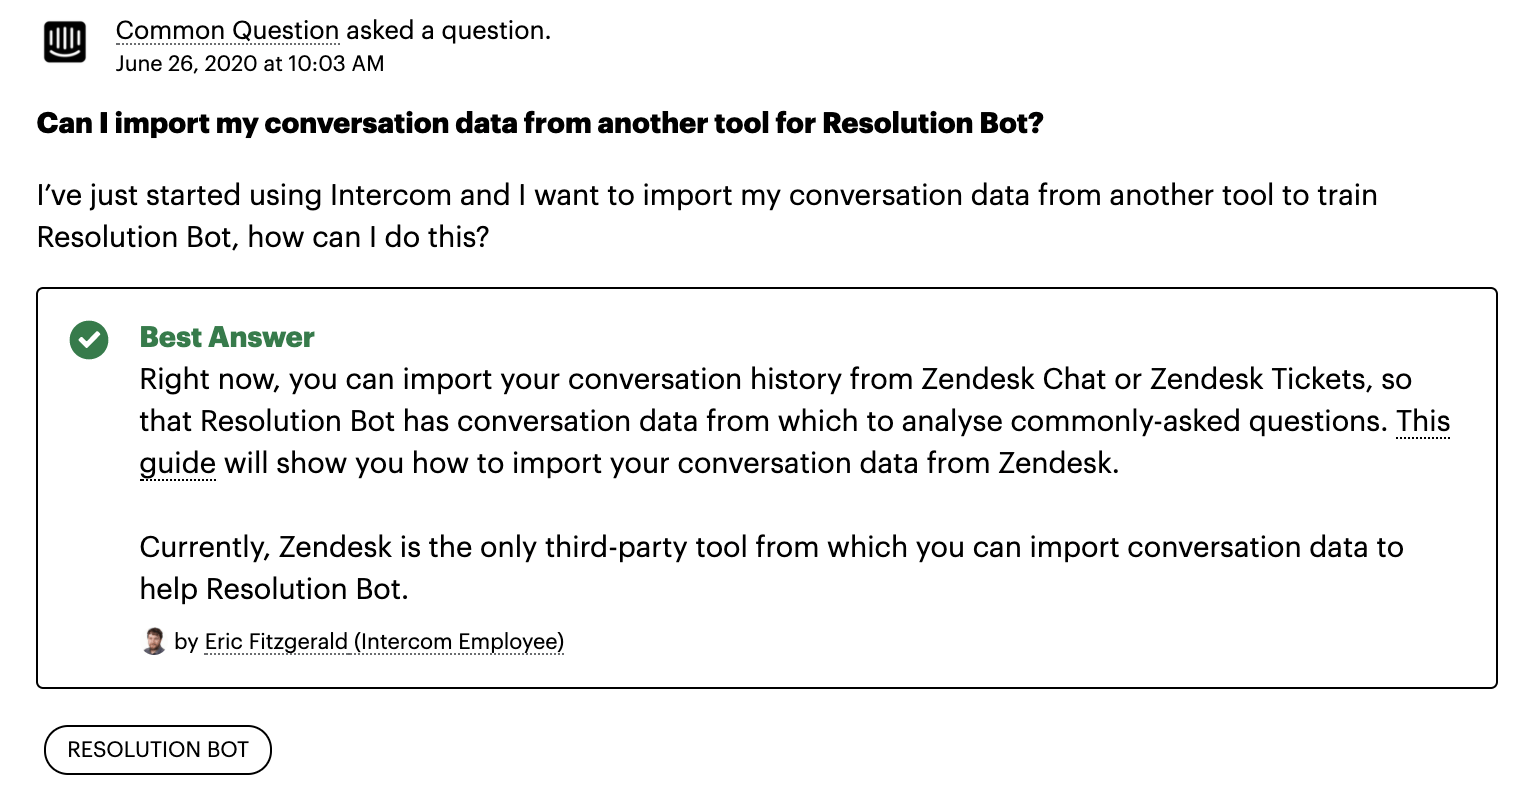 An example of a product-specific Q&A